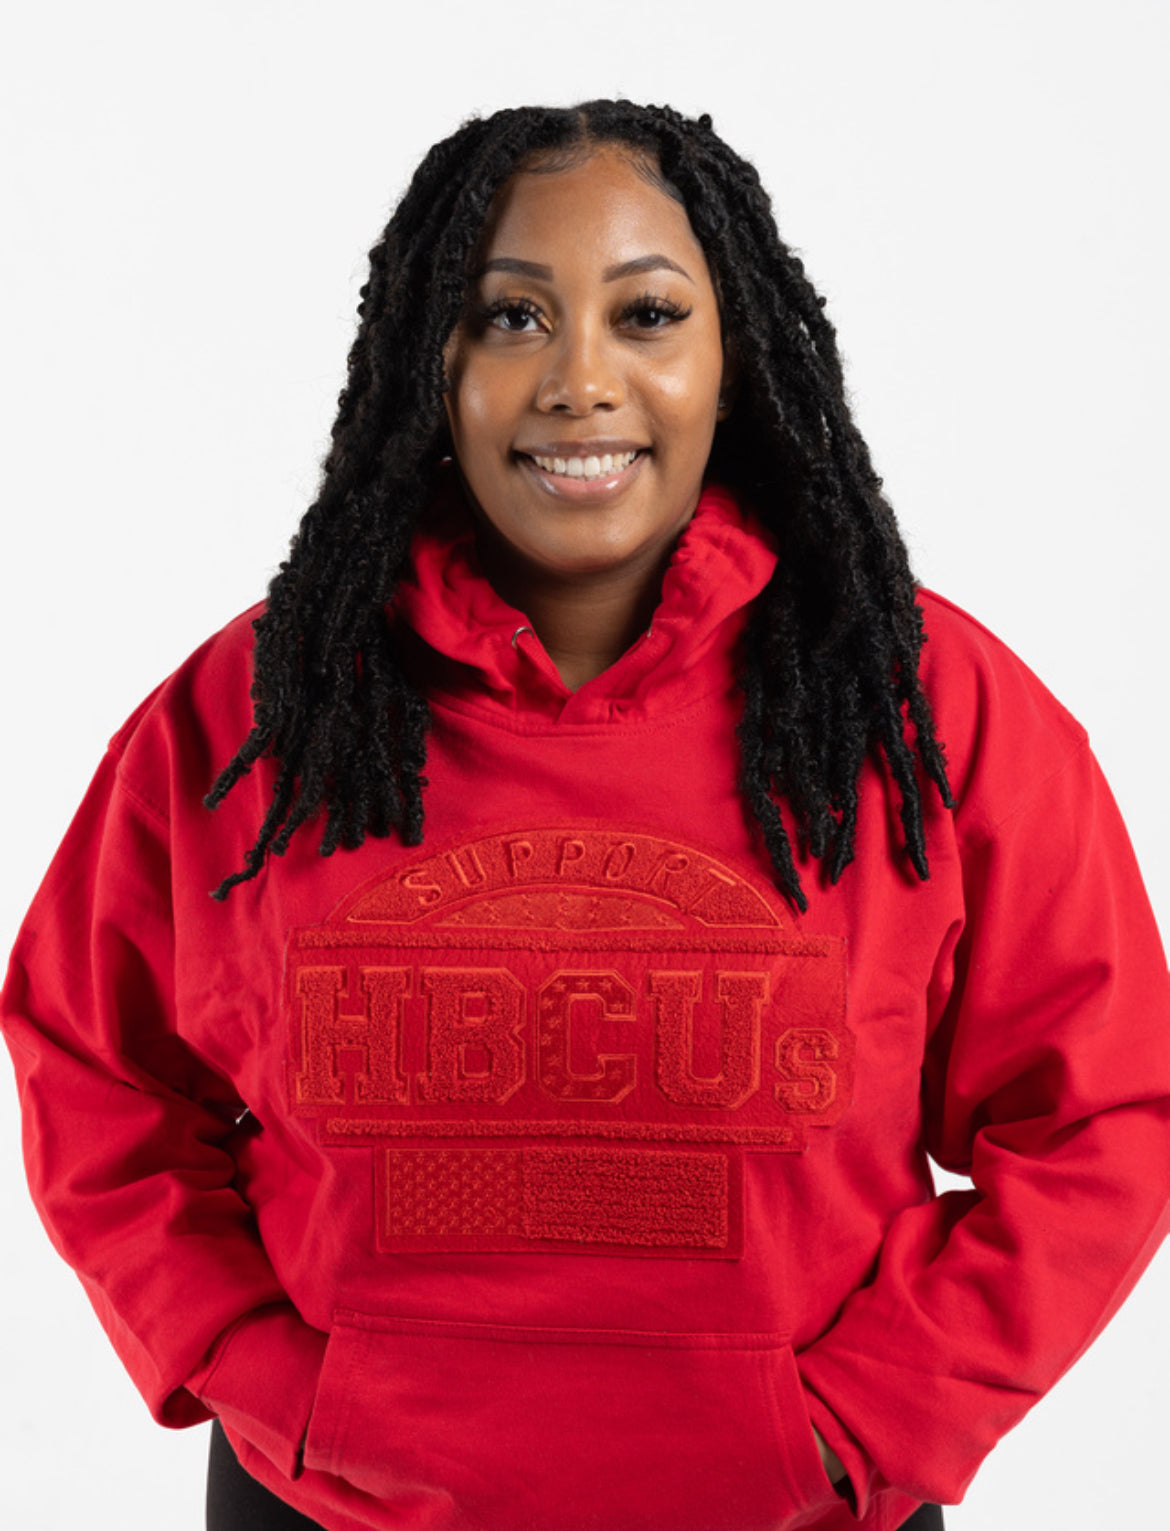 SUPPORT HBCUs ALL RED HOODIE